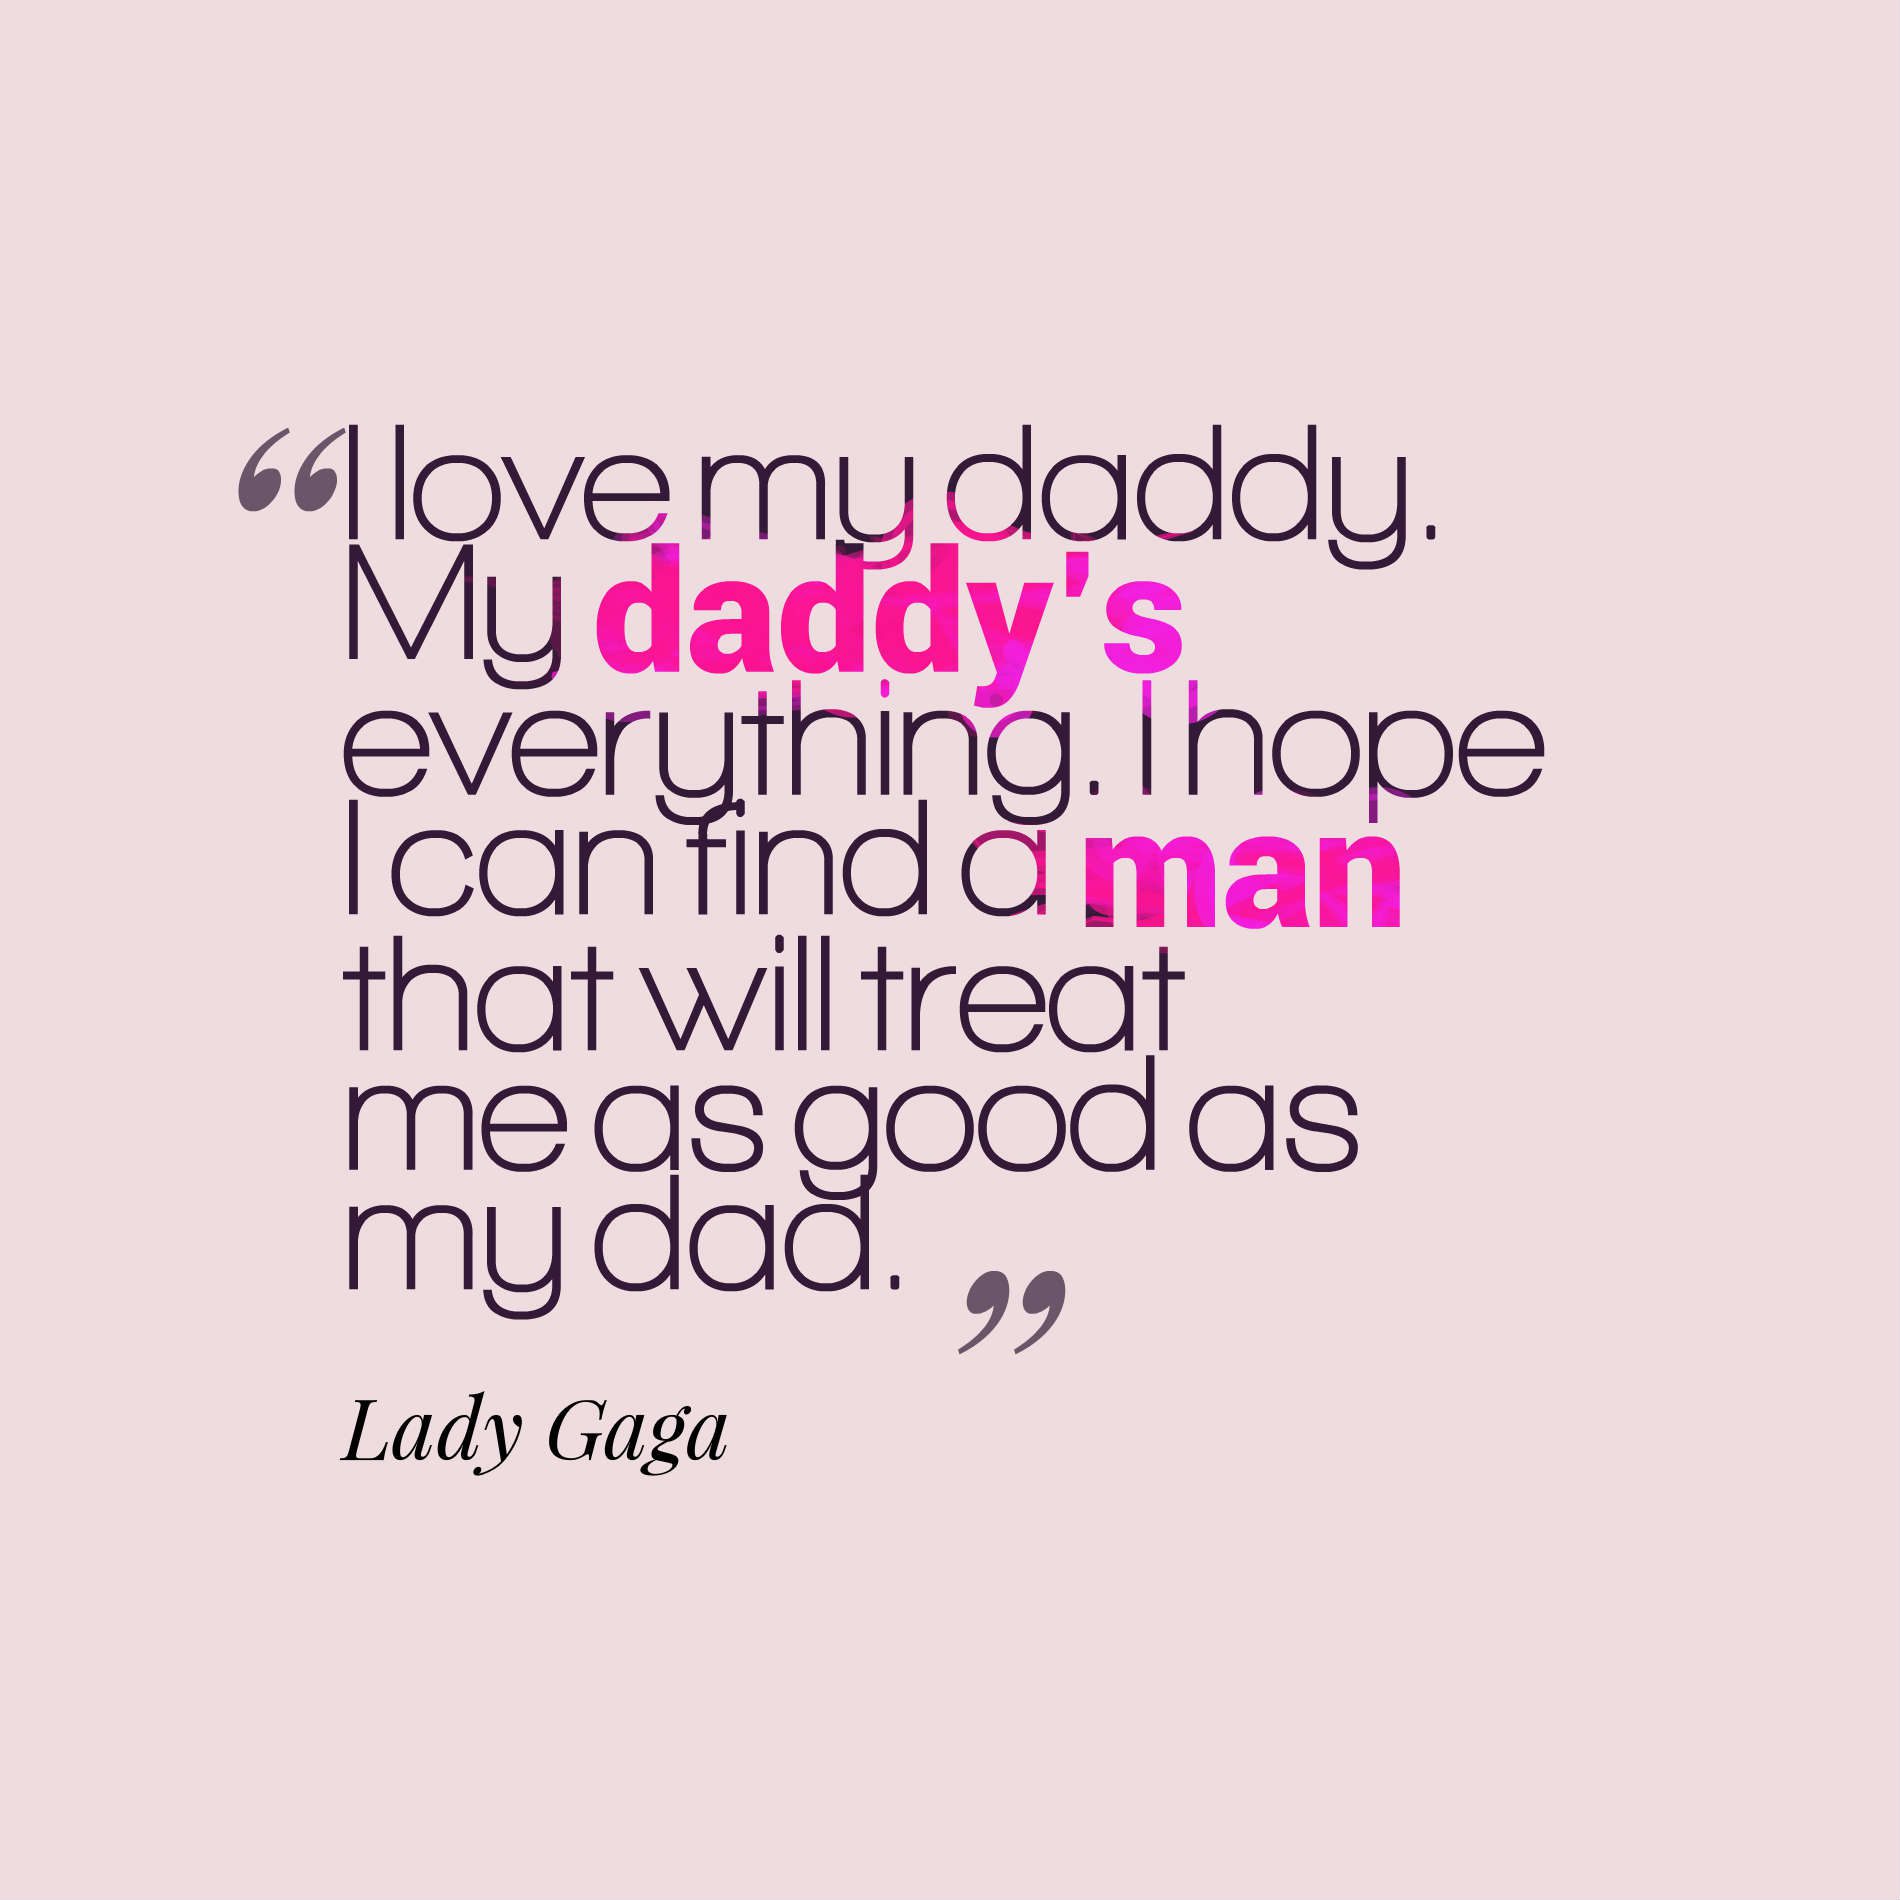 I love my daddy. My daddy’s everything. I hope I can find a man that will treat me as good as my dad.